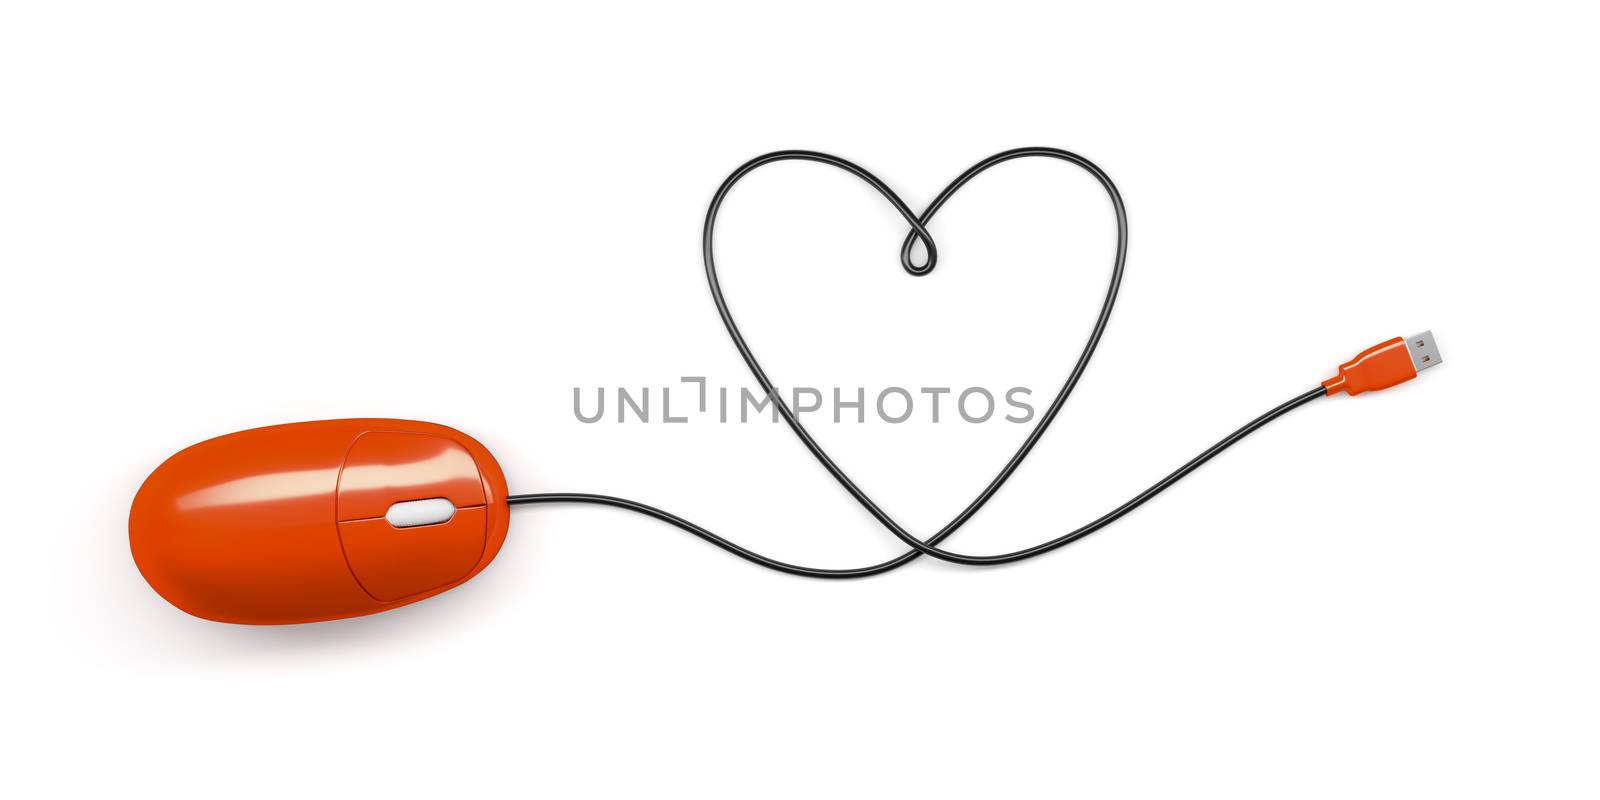 A computer mouse building a heart shape with the cable